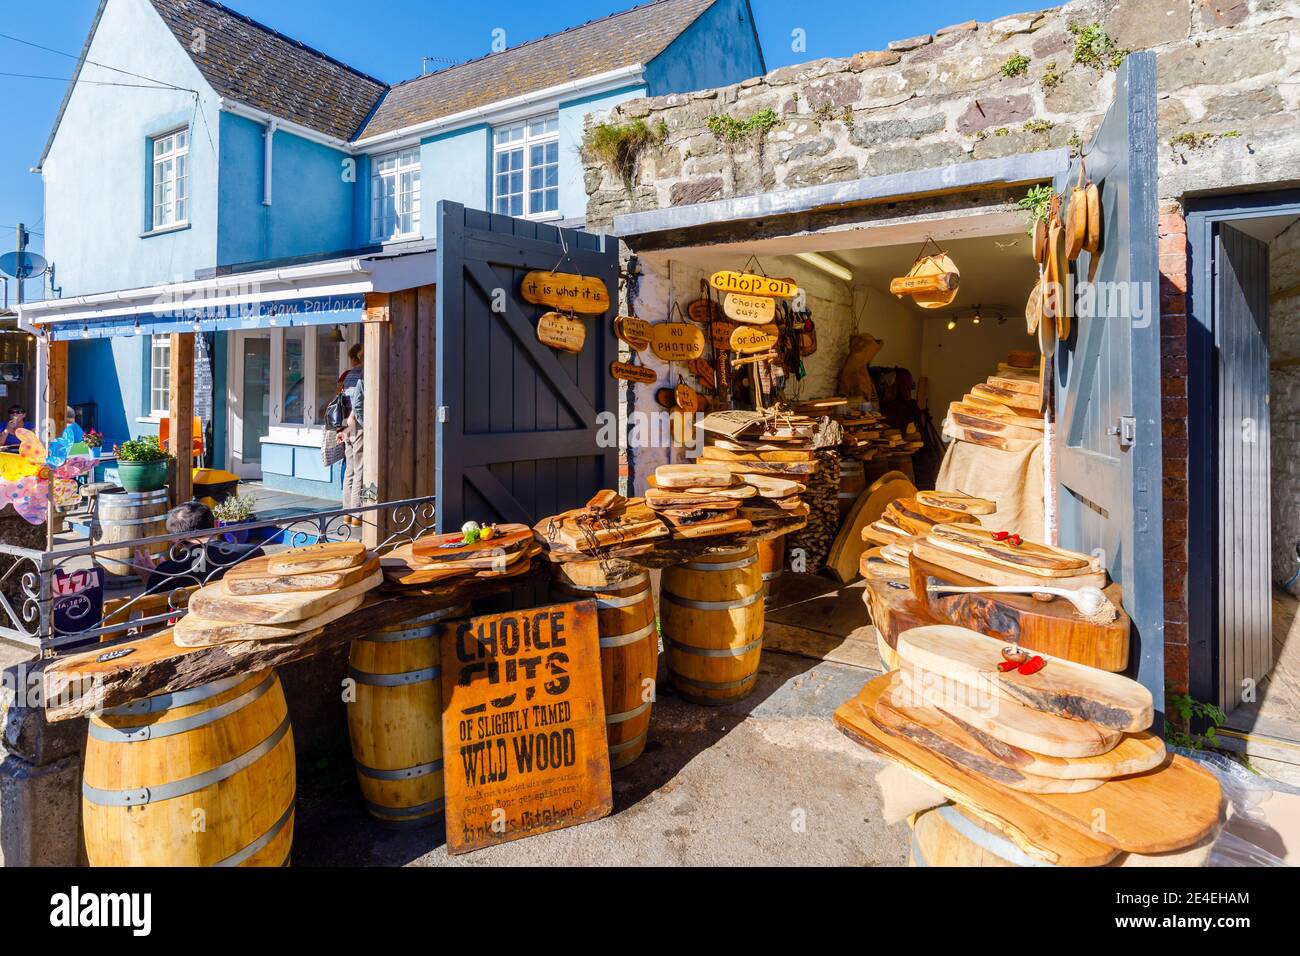 A local wood carver's shop selling tourist souvenirs in the main street of St David's, a small cathedral city in Pembrokeshire, south west Wales Stock Photo